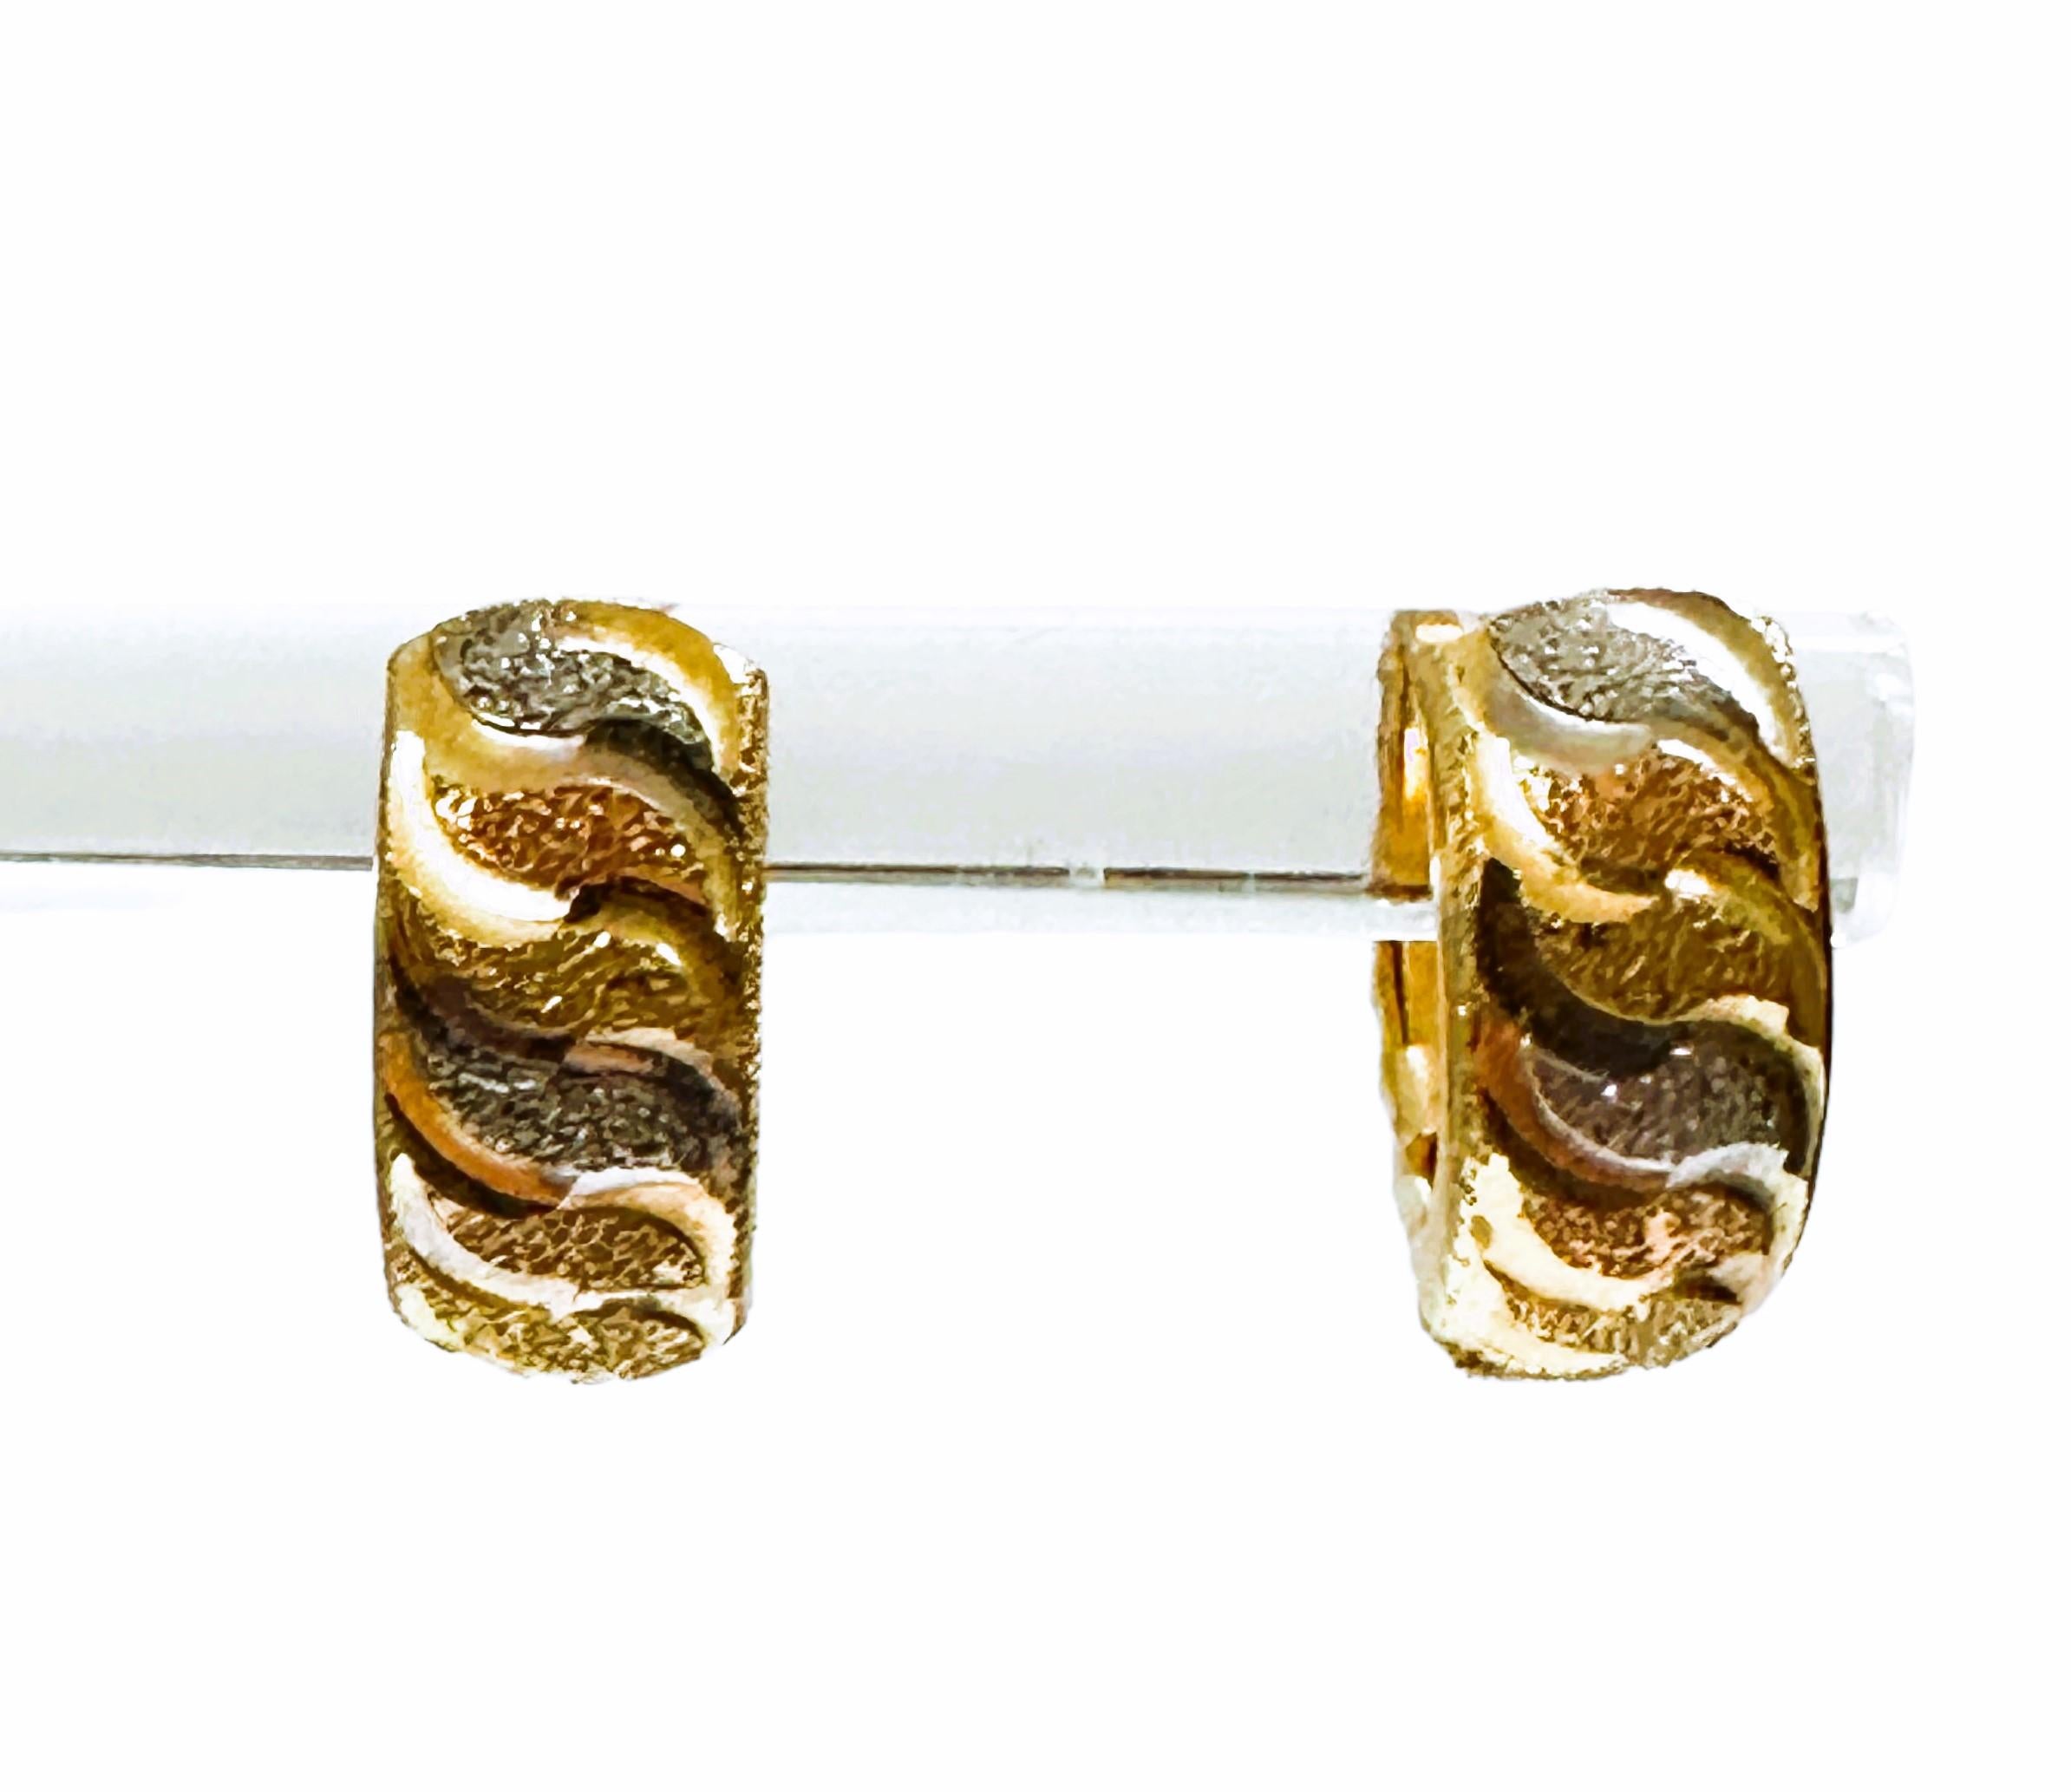 18K White, Yellow & Rose Gold Huggie Earrings 2.39 Grams - Stamped In Excellent Condition For Sale In Eagan, MN